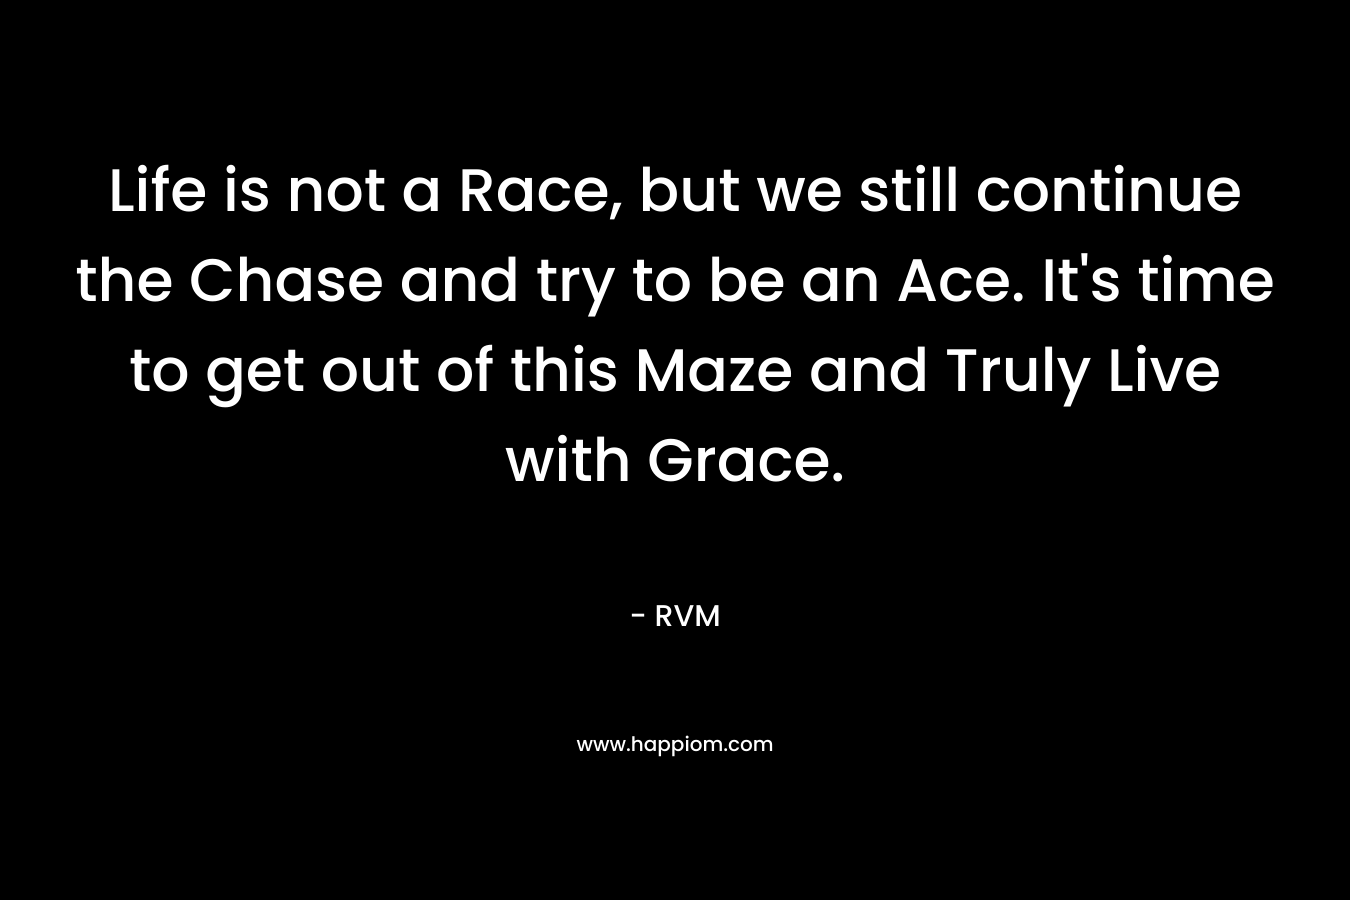 Life is not a Race, but we still continue the Chase and try to be an Ace. It’s time to get out of this Maze and Truly Live with Grace. – RVM